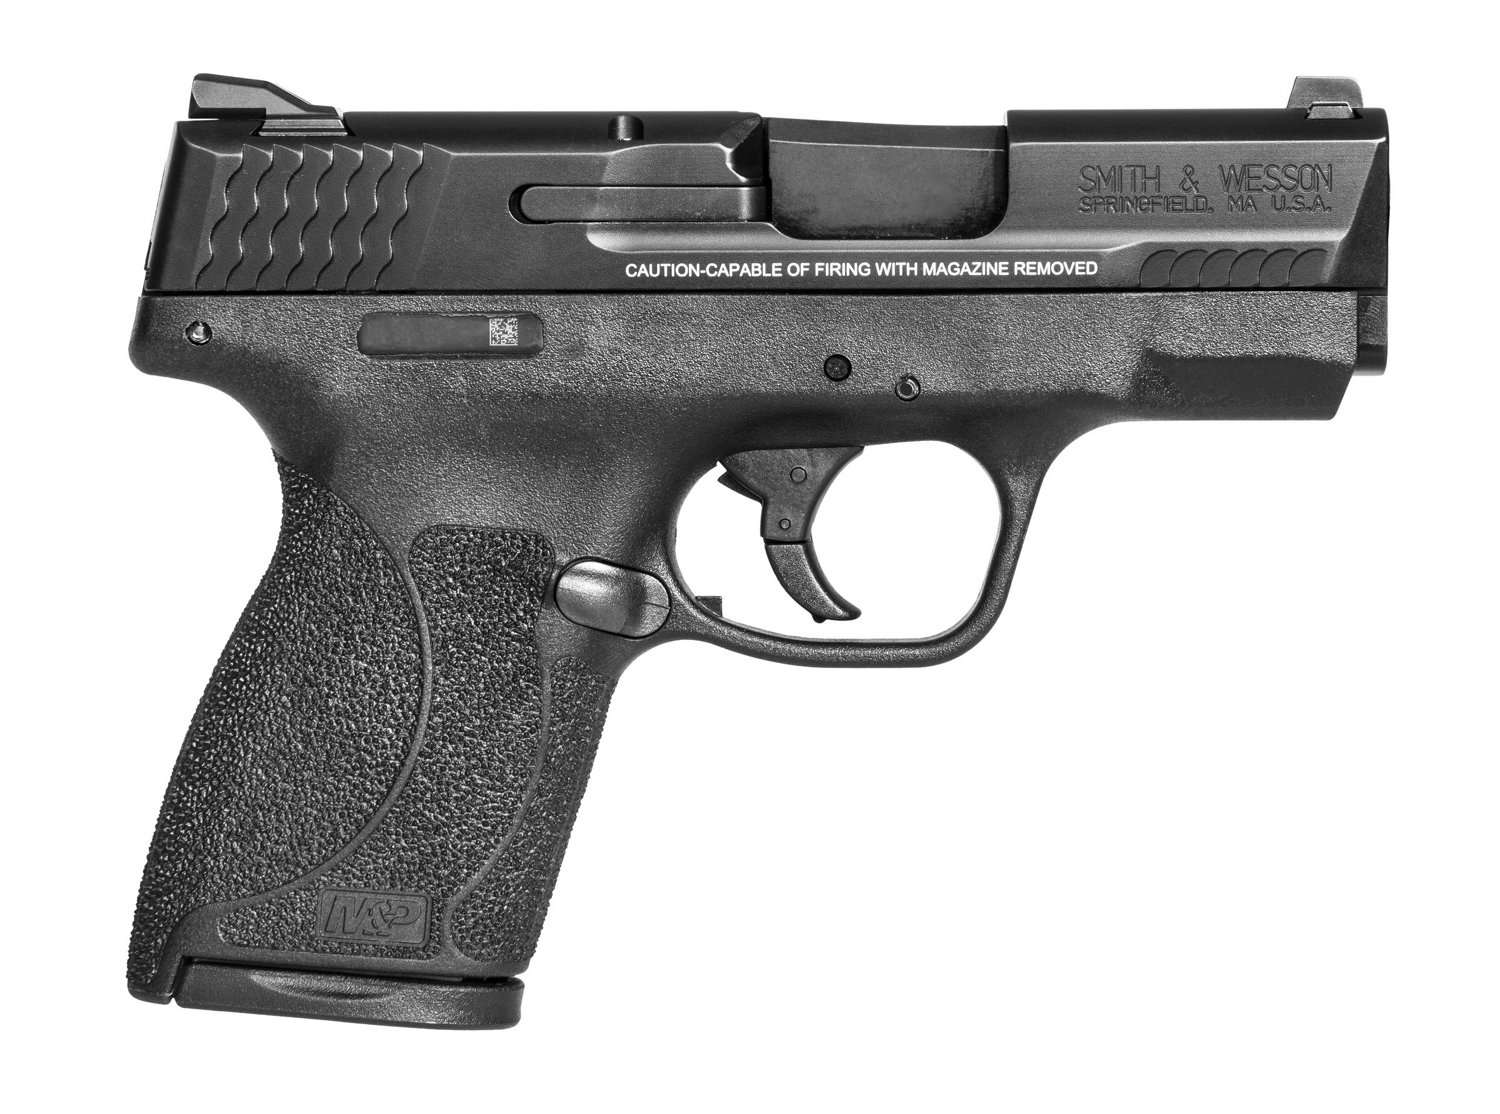 Smith & Wesson M&P45 ShieldM2.0 45 ACP Compact 7-Round Pistol                                                                    - view number 1 selected